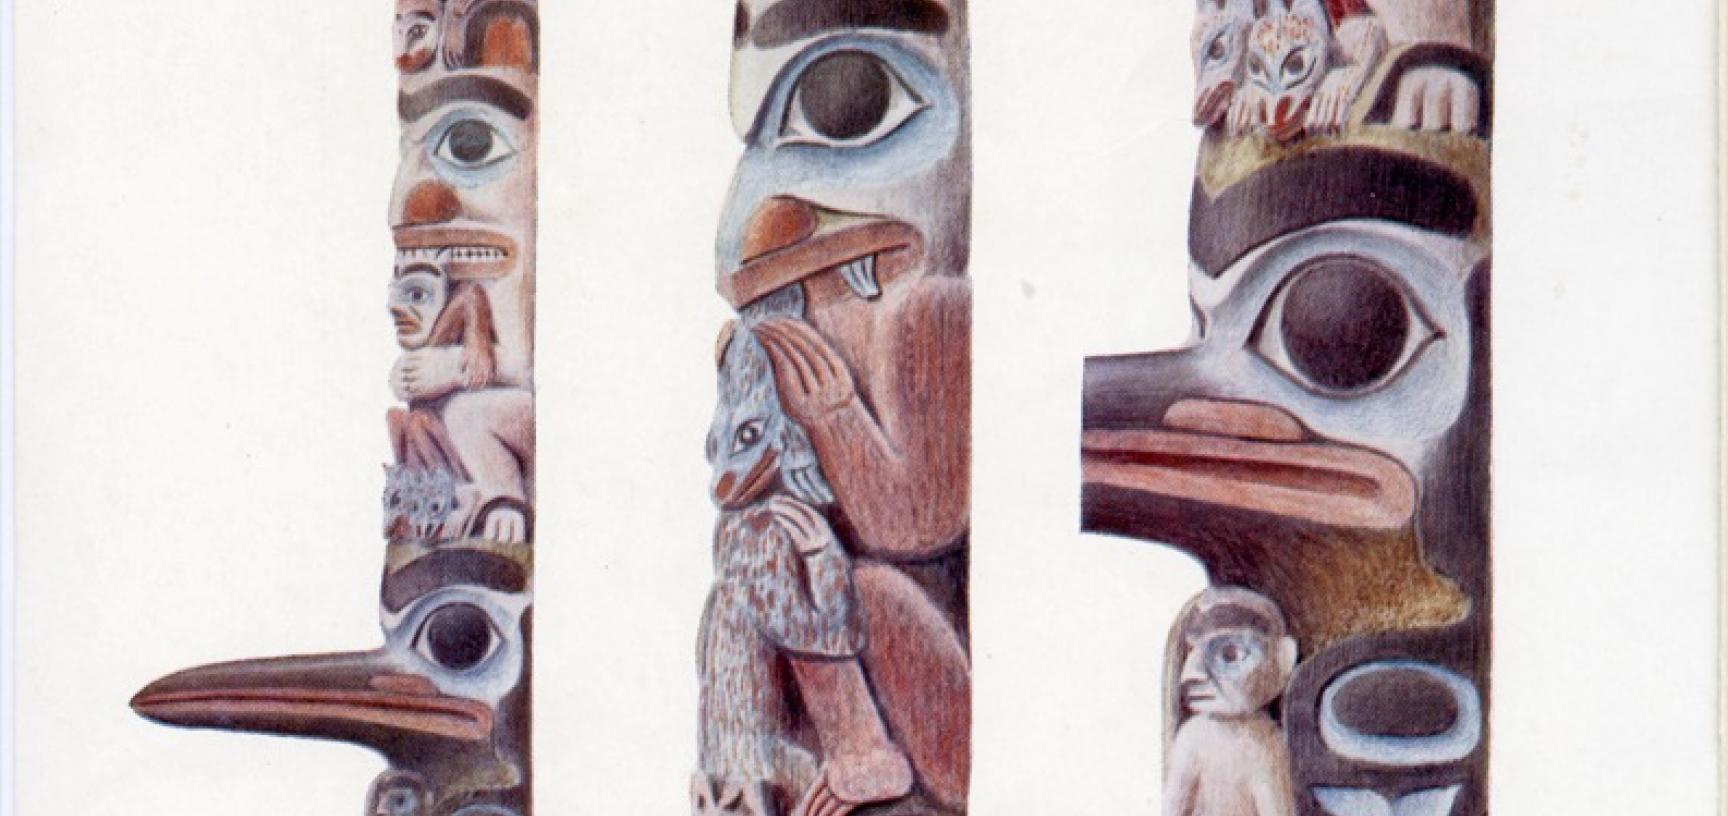 Alfred Robinson’s watercolour reproduced in E. B. Tylor’s article in the journal Man, ‘Note on the Haida Totem-Post lately erected in the Pitt Rivers Museum at Oxford’ (1902).